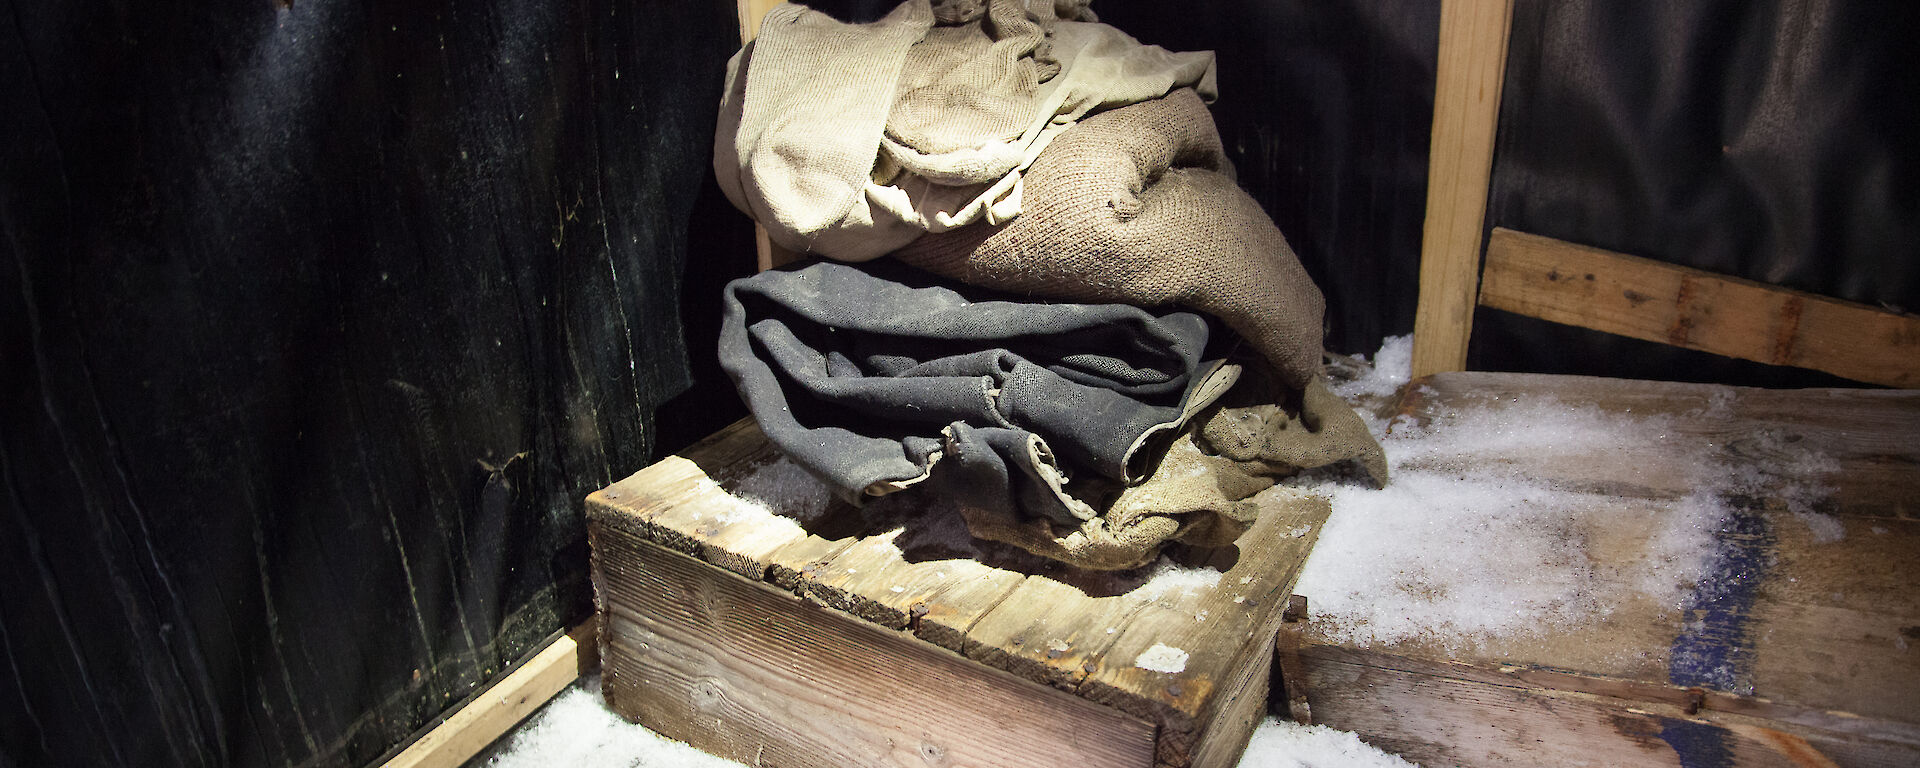 Belgrave Ninnis’ laundered clothing was found in a neatly folded pile in Magnetograph House.